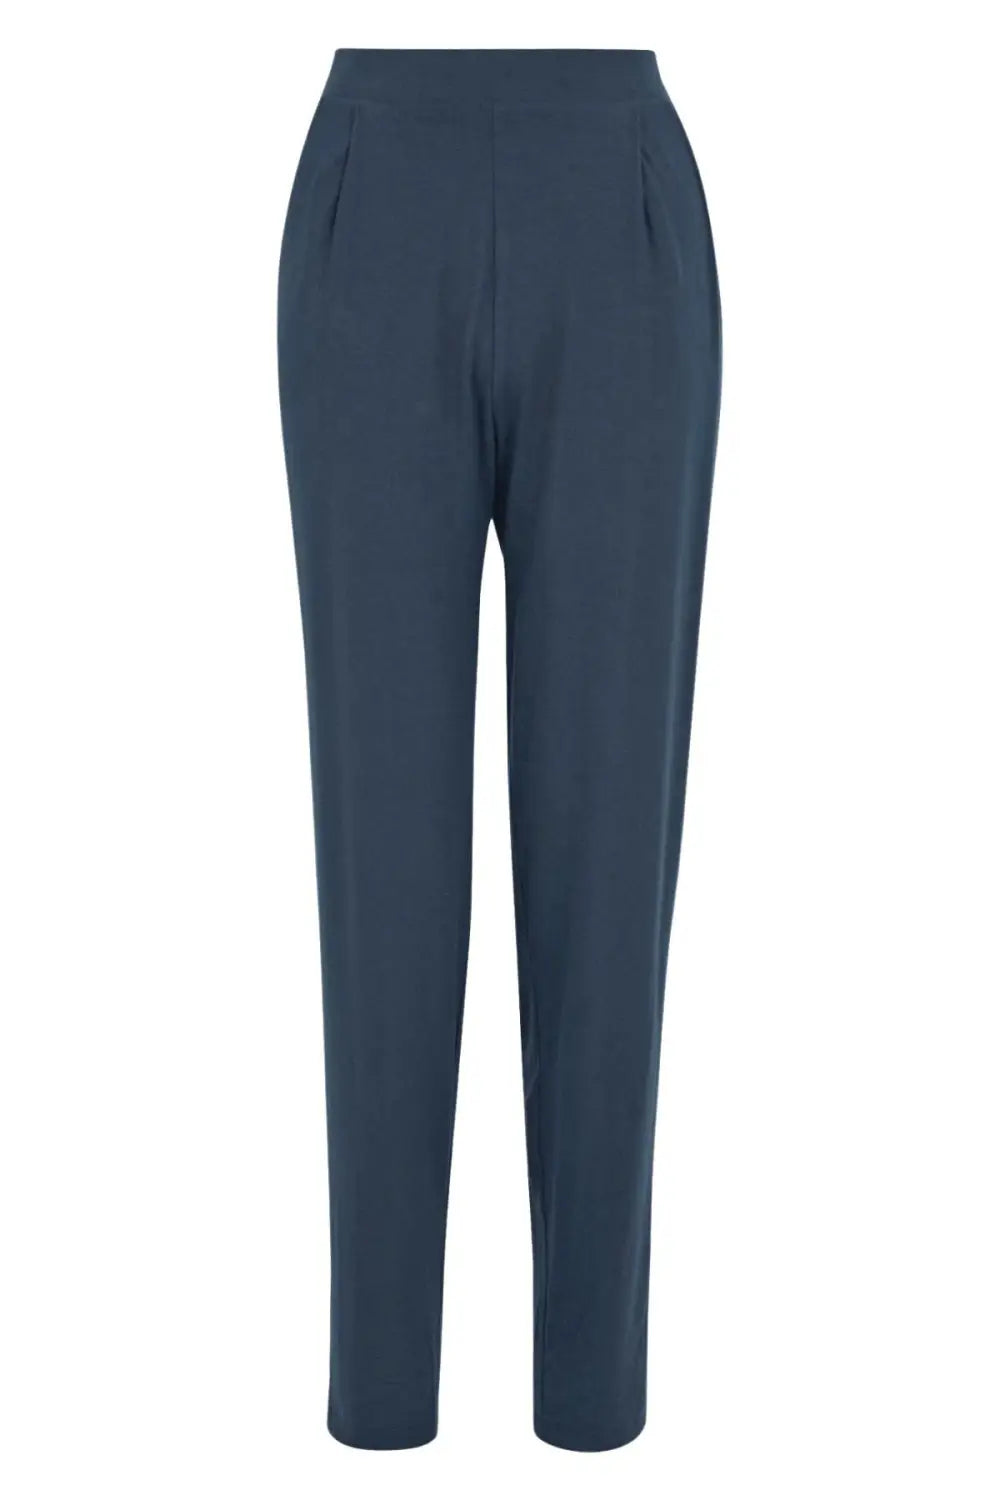 M&S Navy Jersey Tapered Trousers